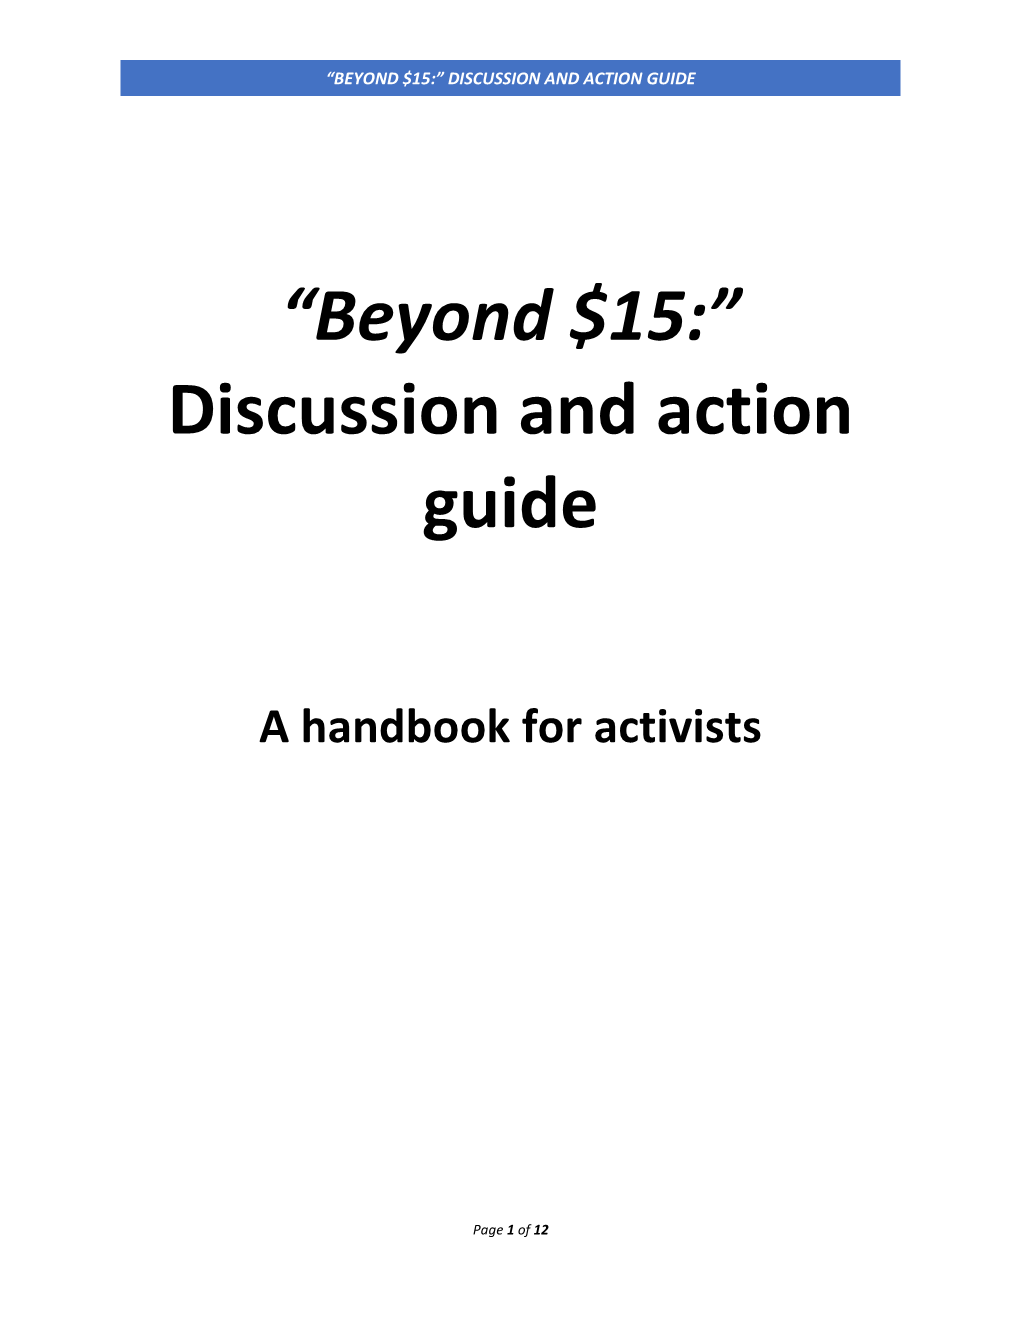 Beyond $15:” Discussion and Action Guide